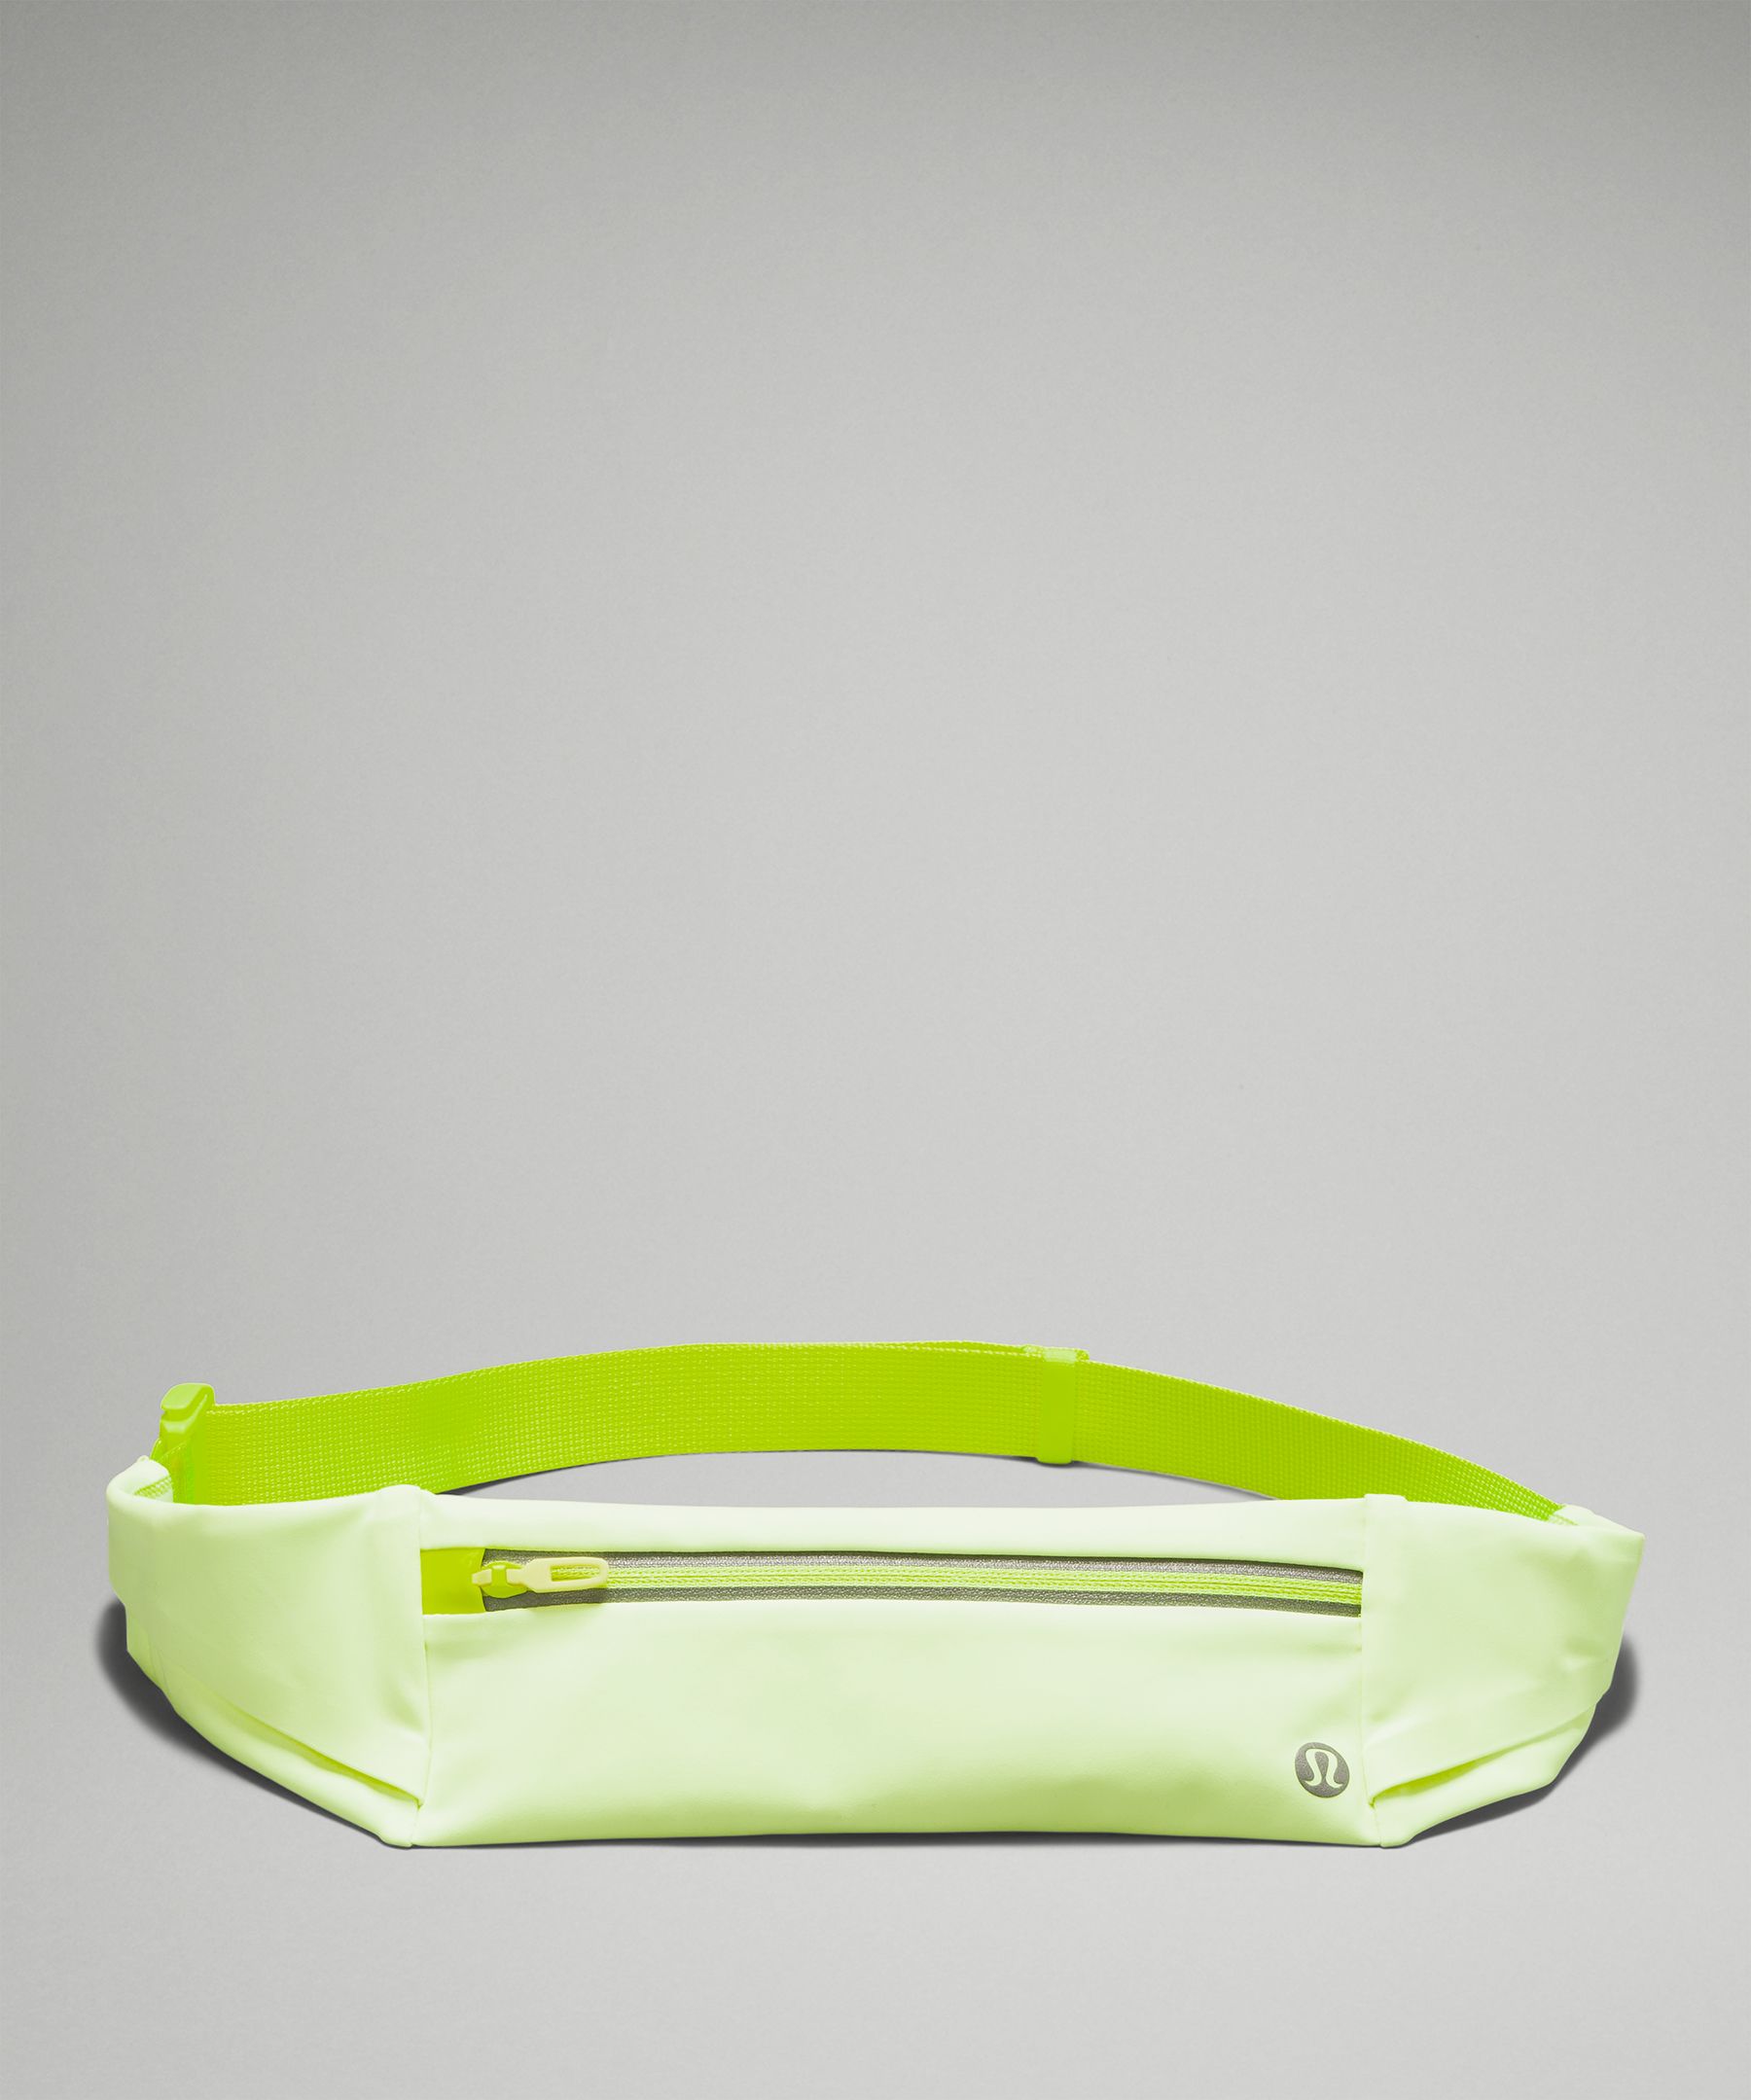 The $38 Lululemon Everywhere Belt Bag I Can't Stop Wearing